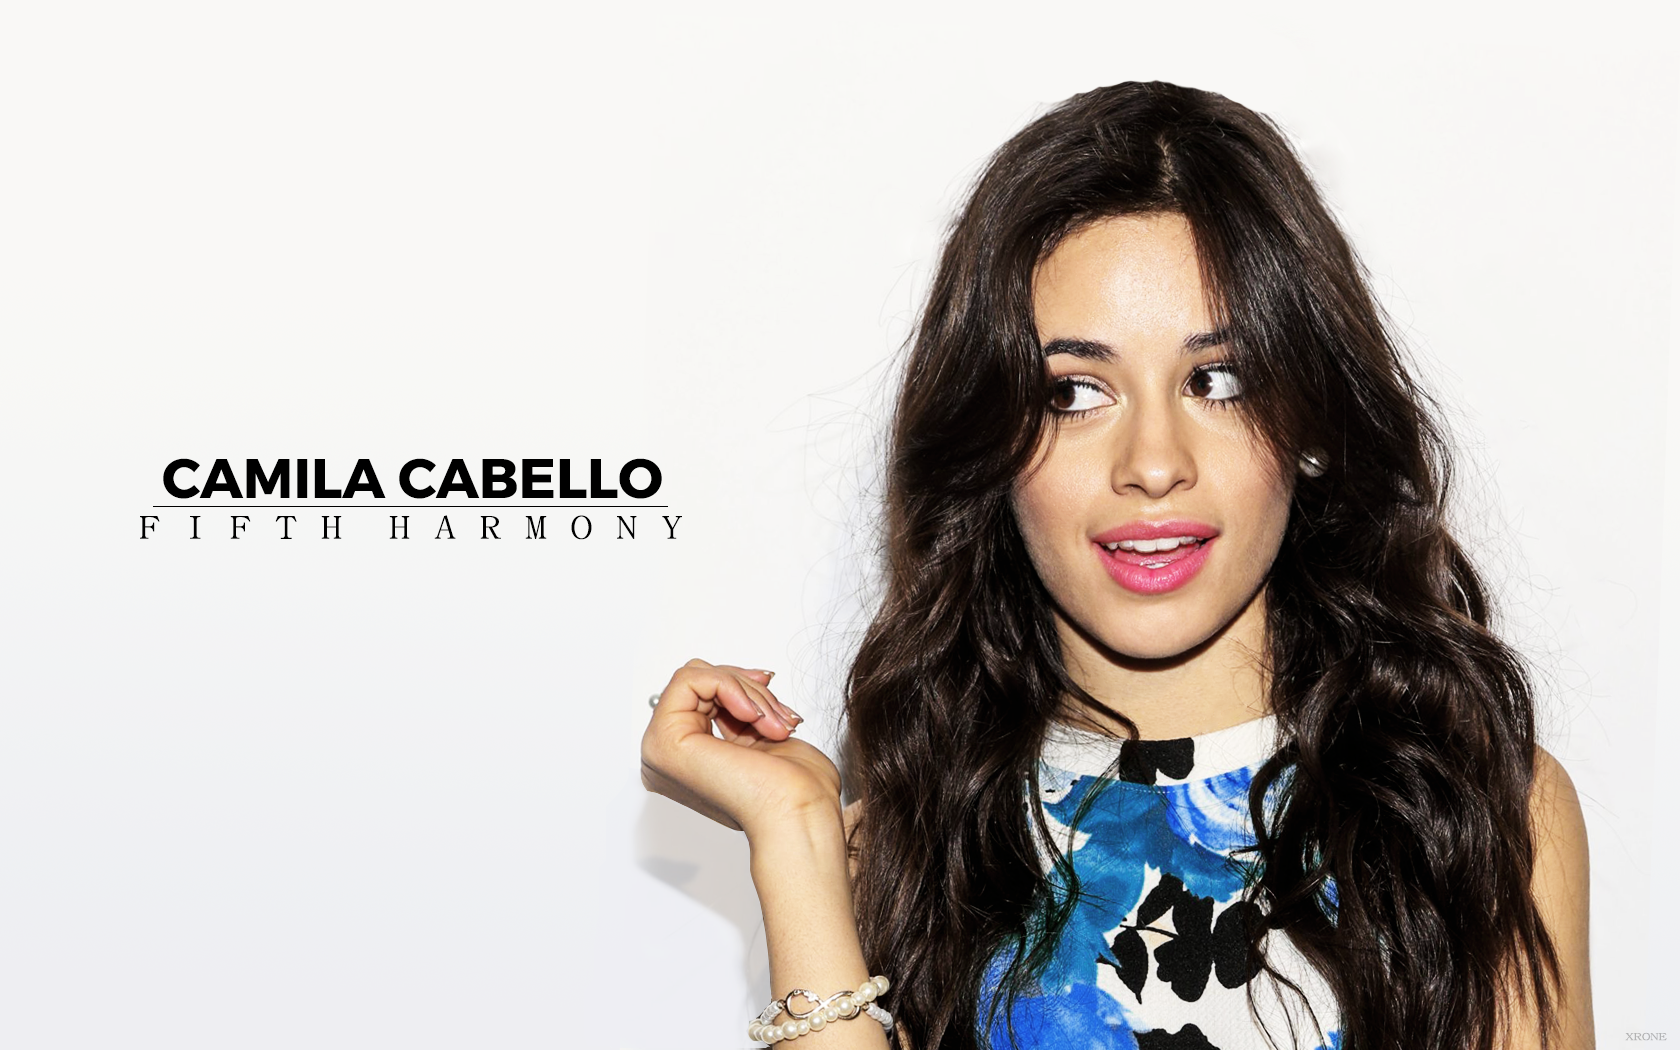 Brown Eyes Brunette Camila Cabello Fifth Harmony Latina Singer Woman 1680x1050